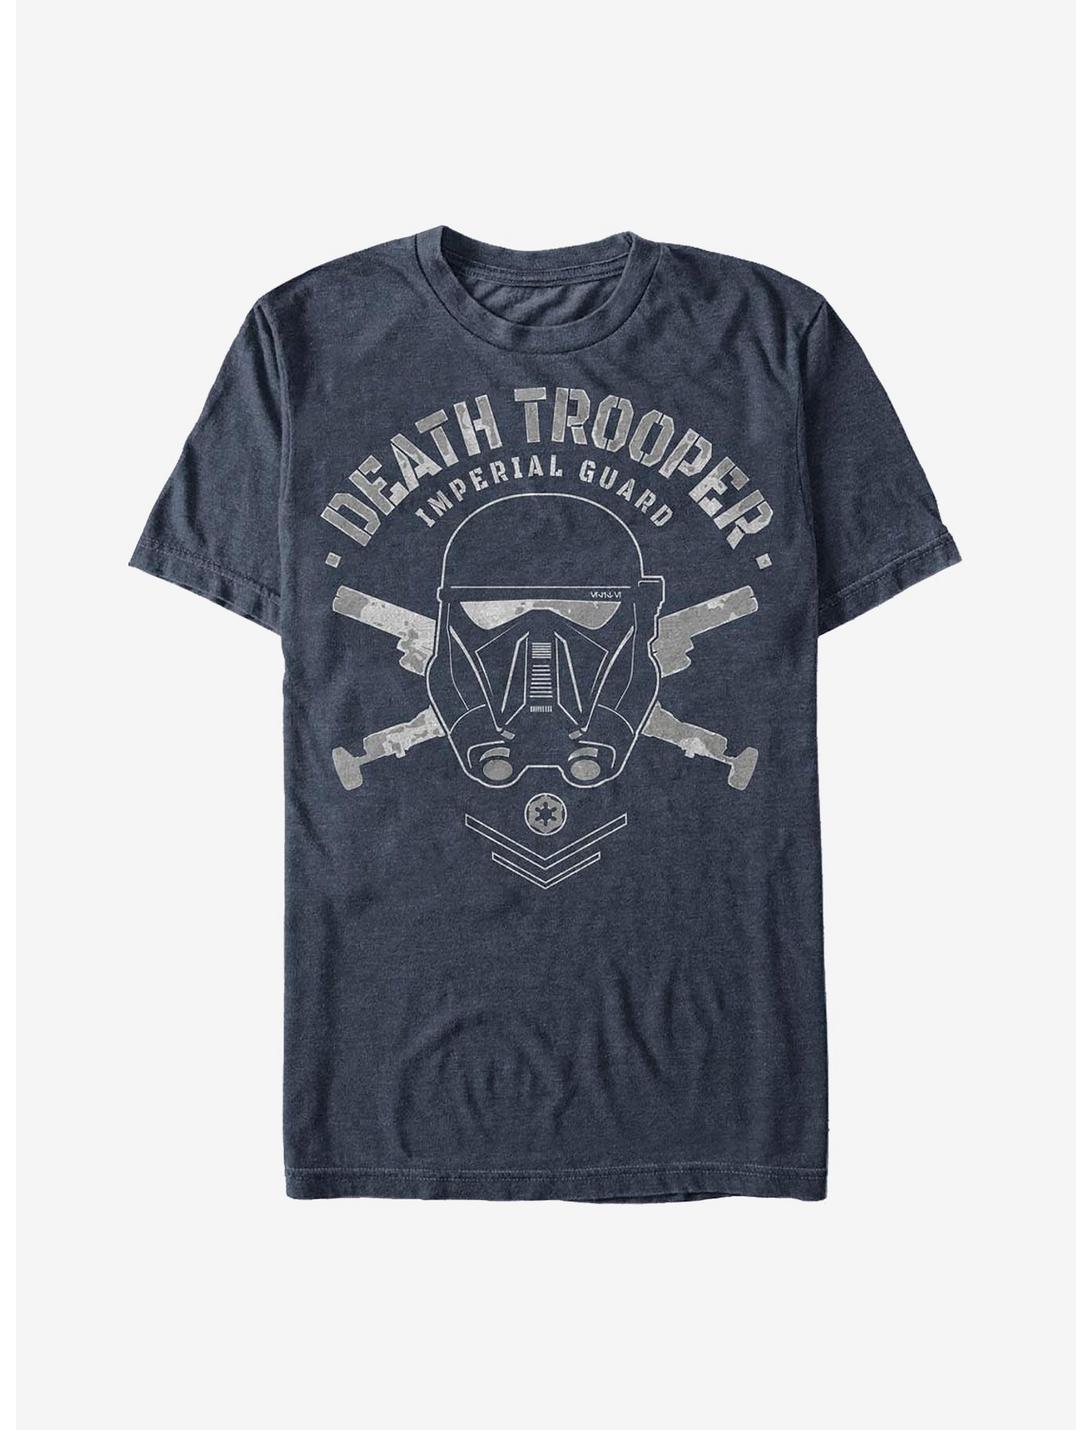 Star Wars Rogue One: A Star Wars Story Death Trooper Imperial Guard T-Shirt, NAVY HTR, hi-res